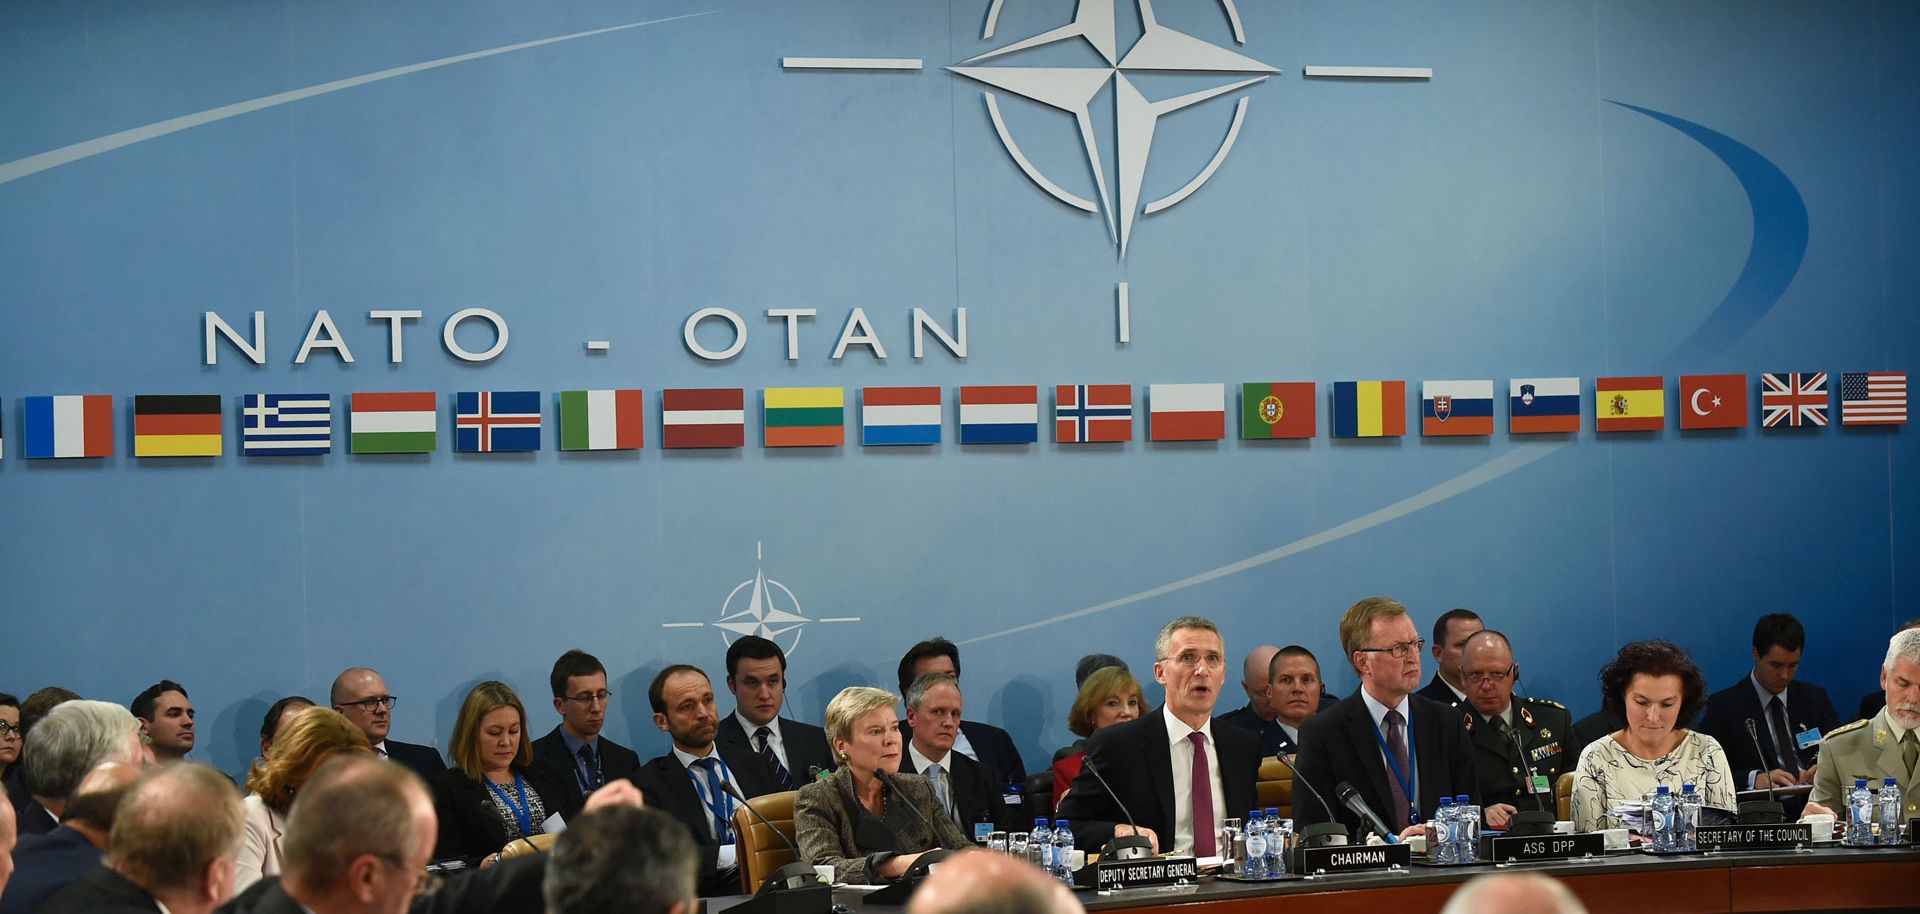 In part 1 of this series on the North Atlantic Treaty Organization, NATO Secretary-General Jens Stoltenberg speaks at a NATO Defense ministers' meeting at the NATO headquarters in Brussels on October 26, 2016. 